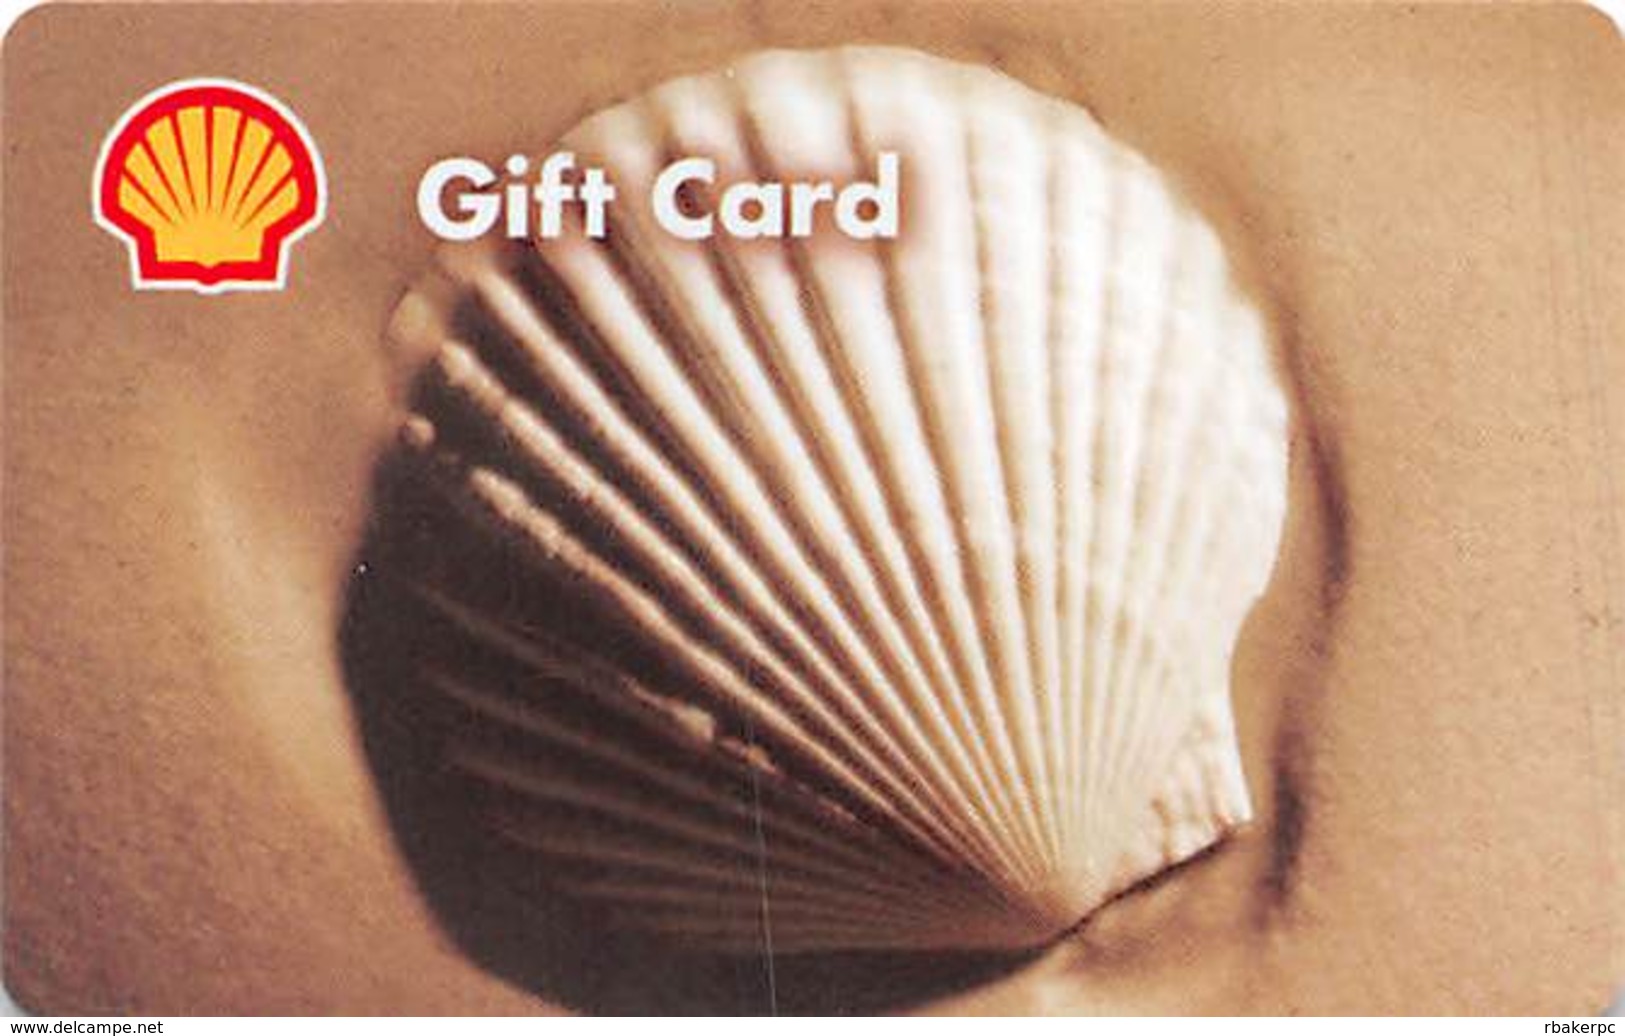 Shell Gas Station Gift Card - No Printed Value (c) 2006 - Gift Cards